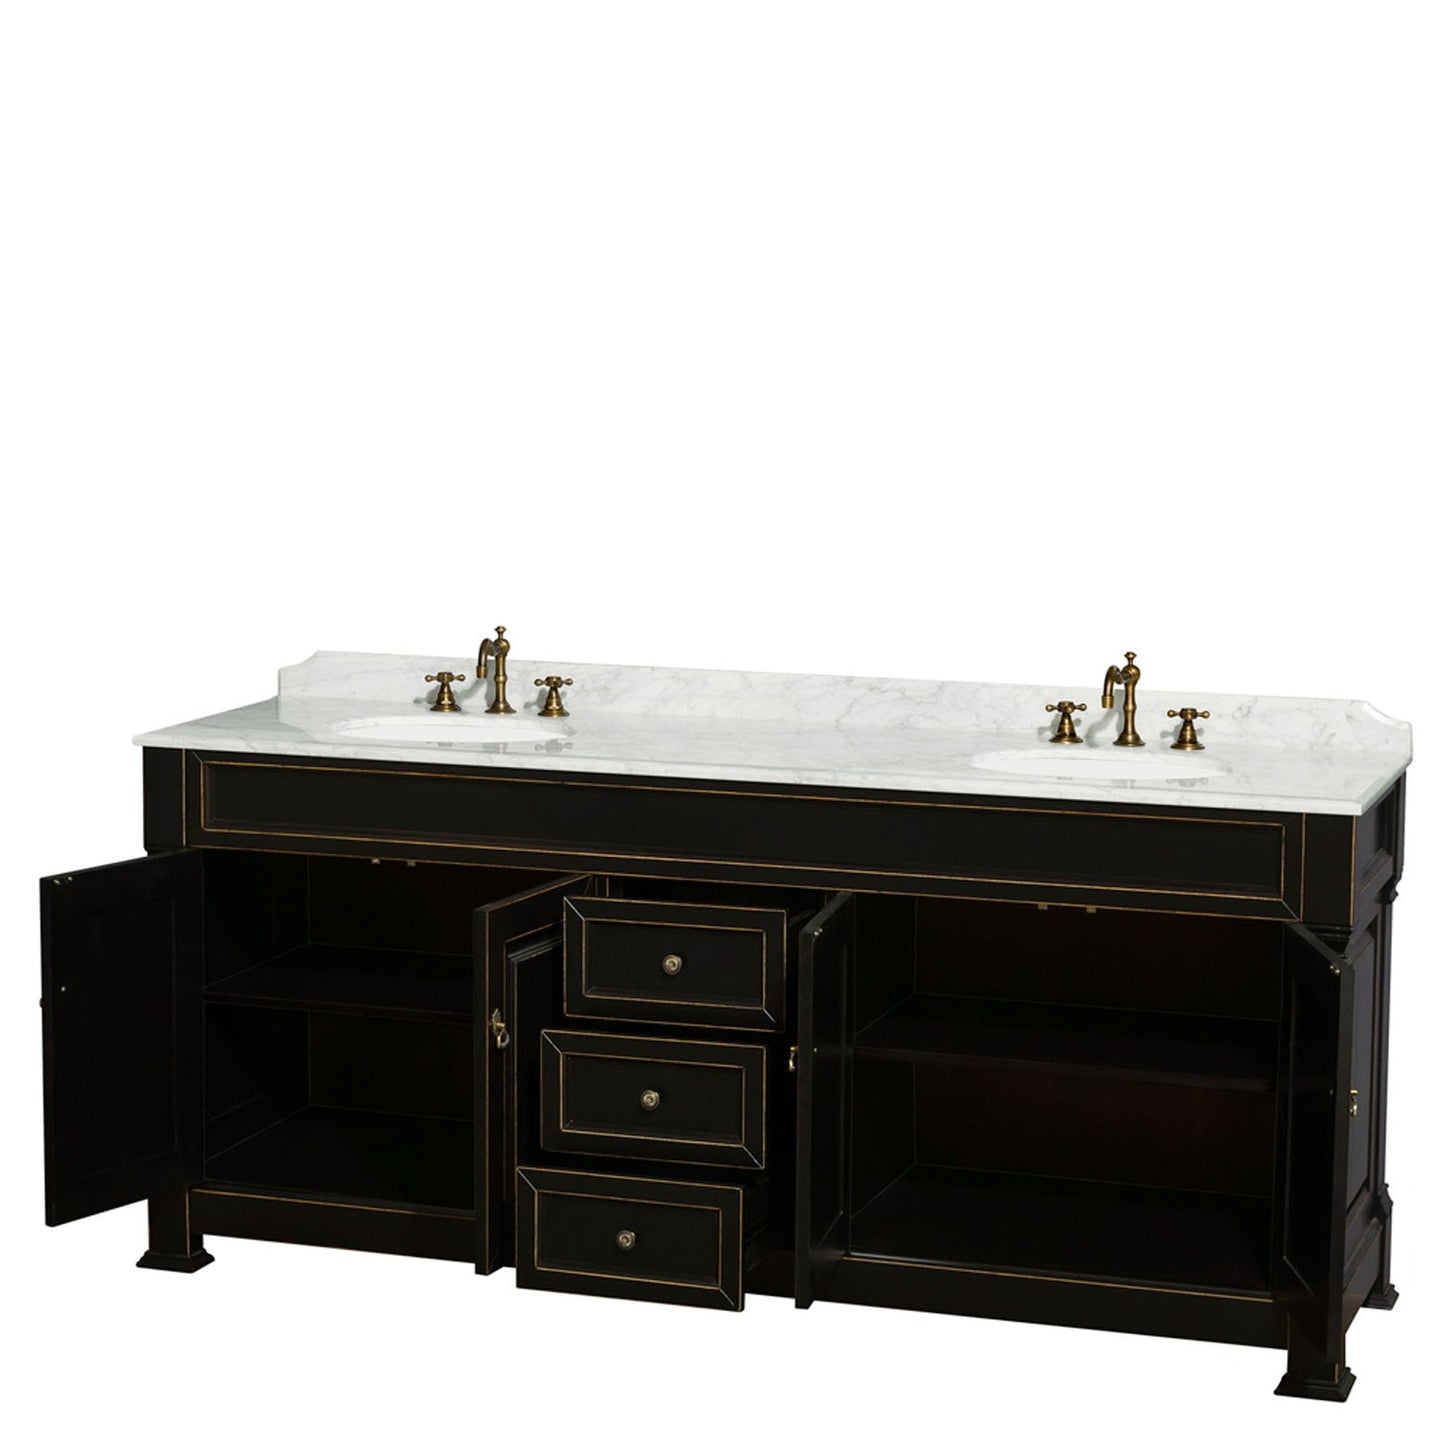 Wyndham Collection Andover 80" Double Bathroom Vanity in Black With White Carrara Marble Countertop & Undermount Oval Sink